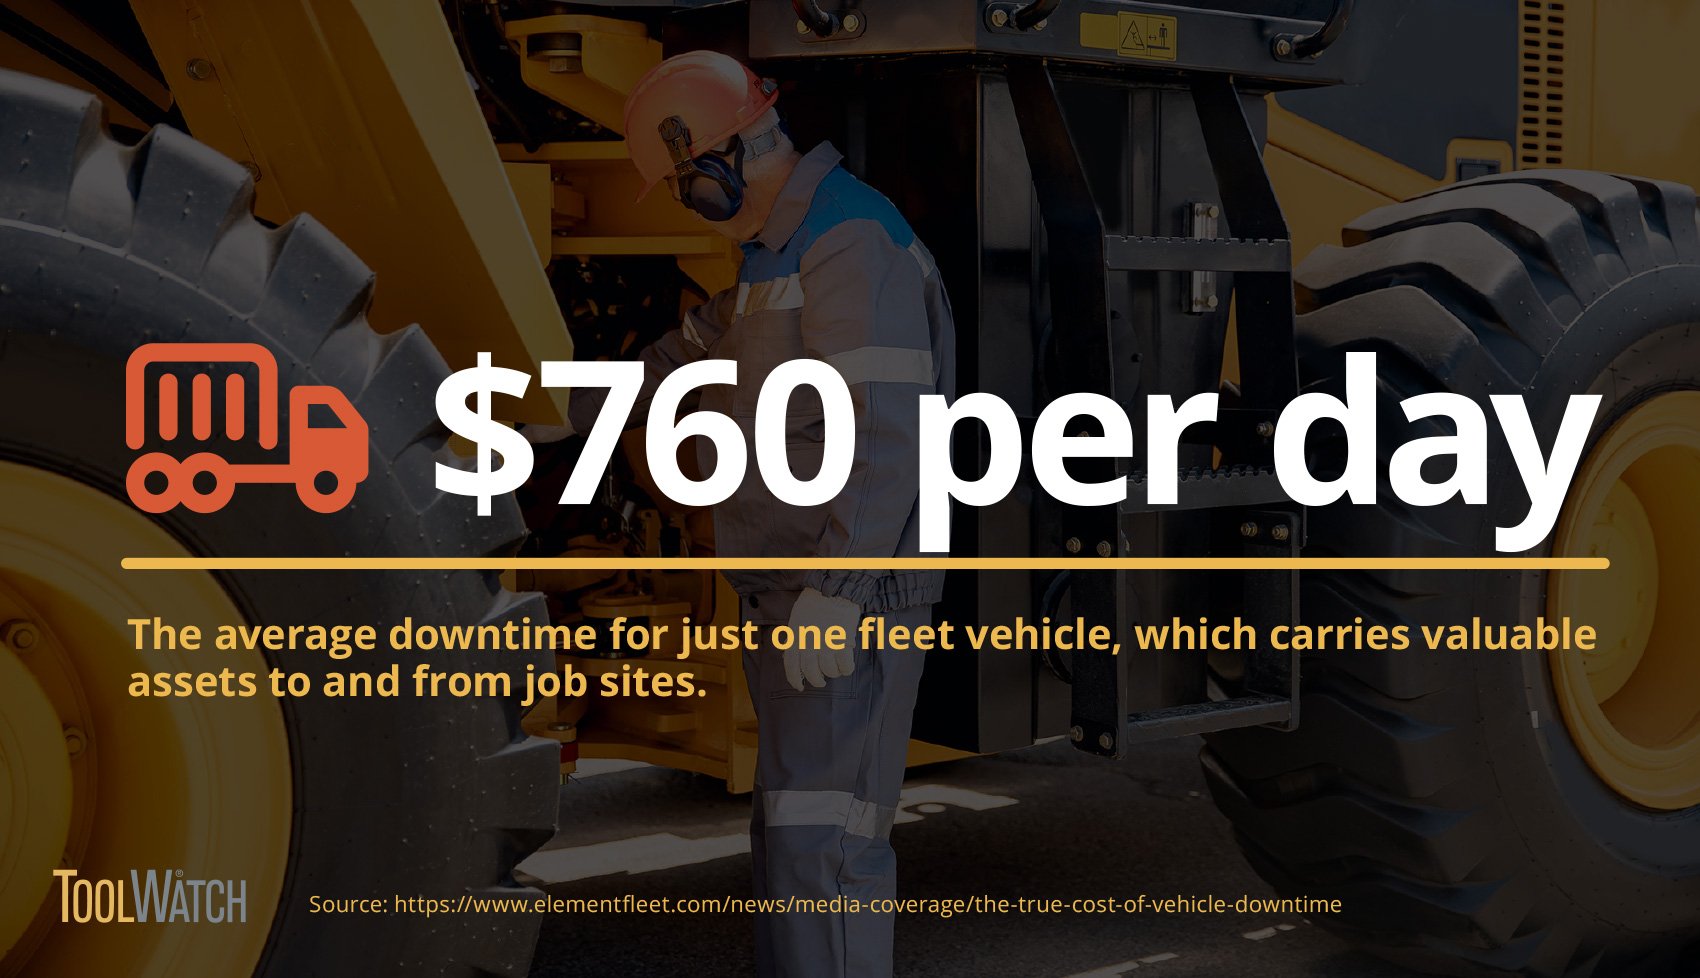 Average downtime cost for one fleet vehicle